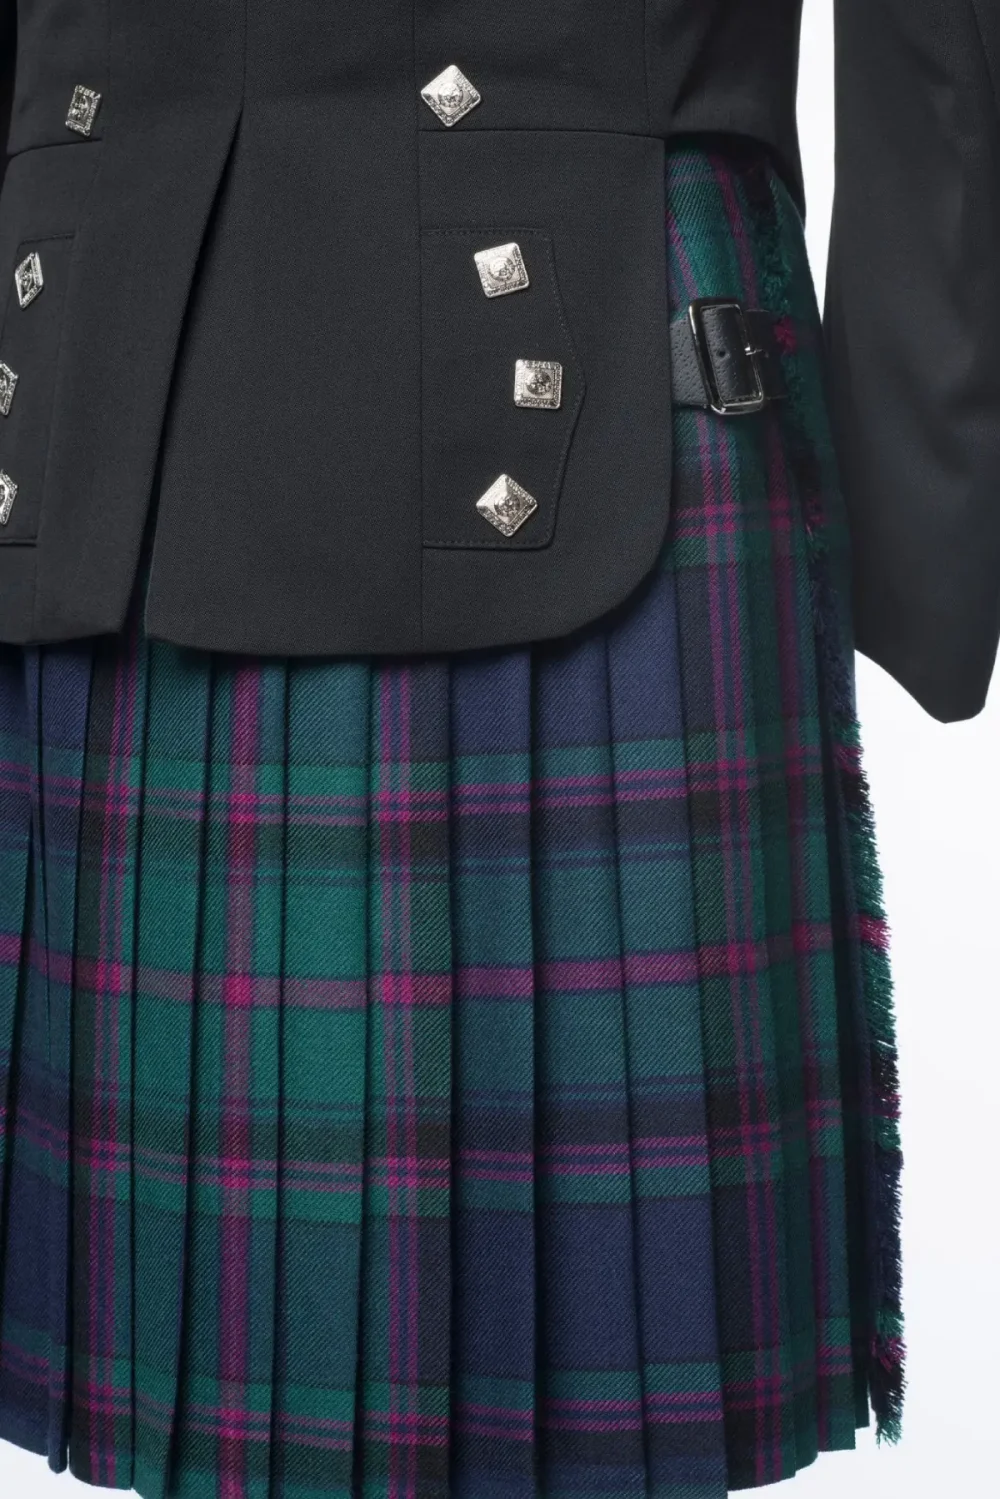 A back photo of Prince Charlie Kilt Outfit with 5 button Vest.